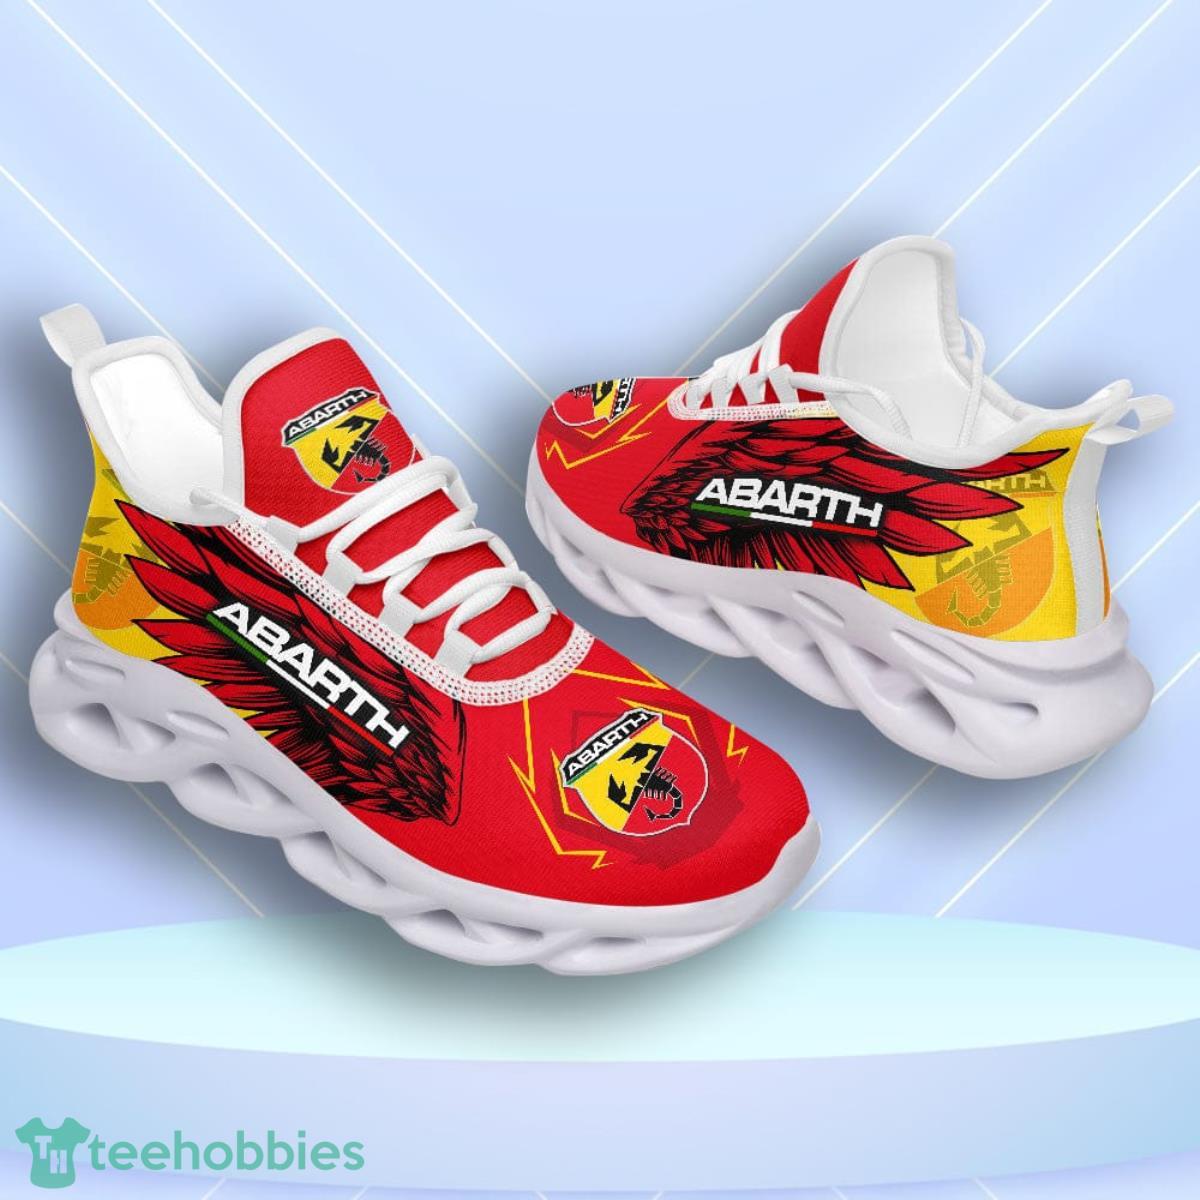 Abarth Team Max Soul Shoes Running Sneakers Product Photo 1